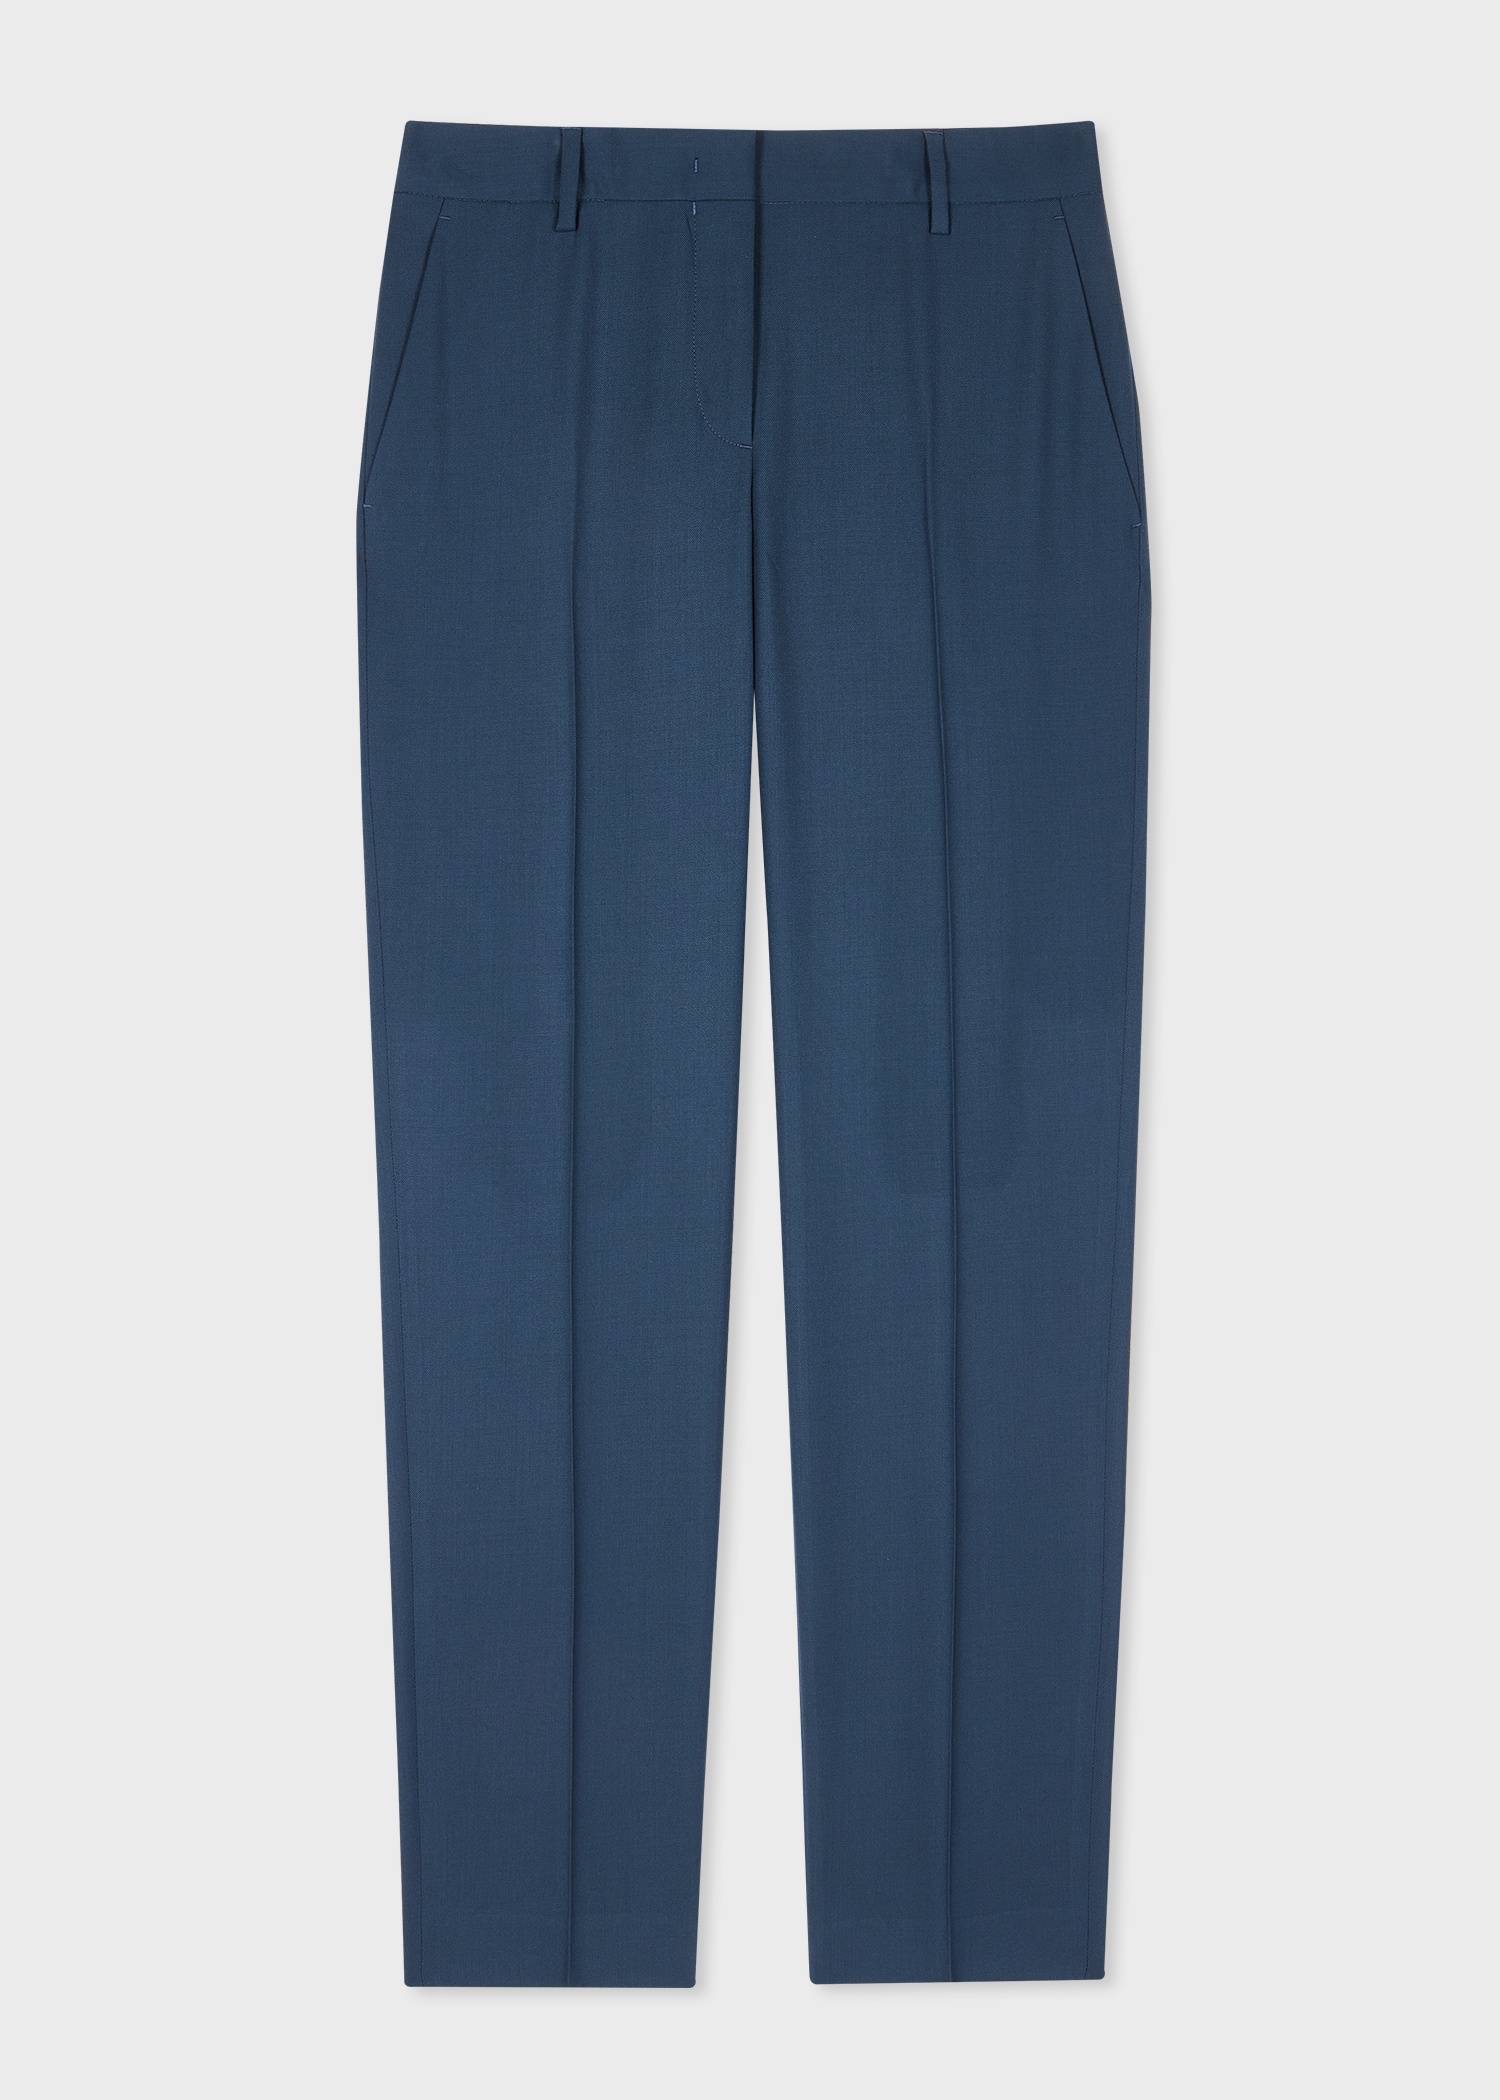 A Suit To Travel In - Women's Petrol Blue Slim-Fit Wool Trousers - 1